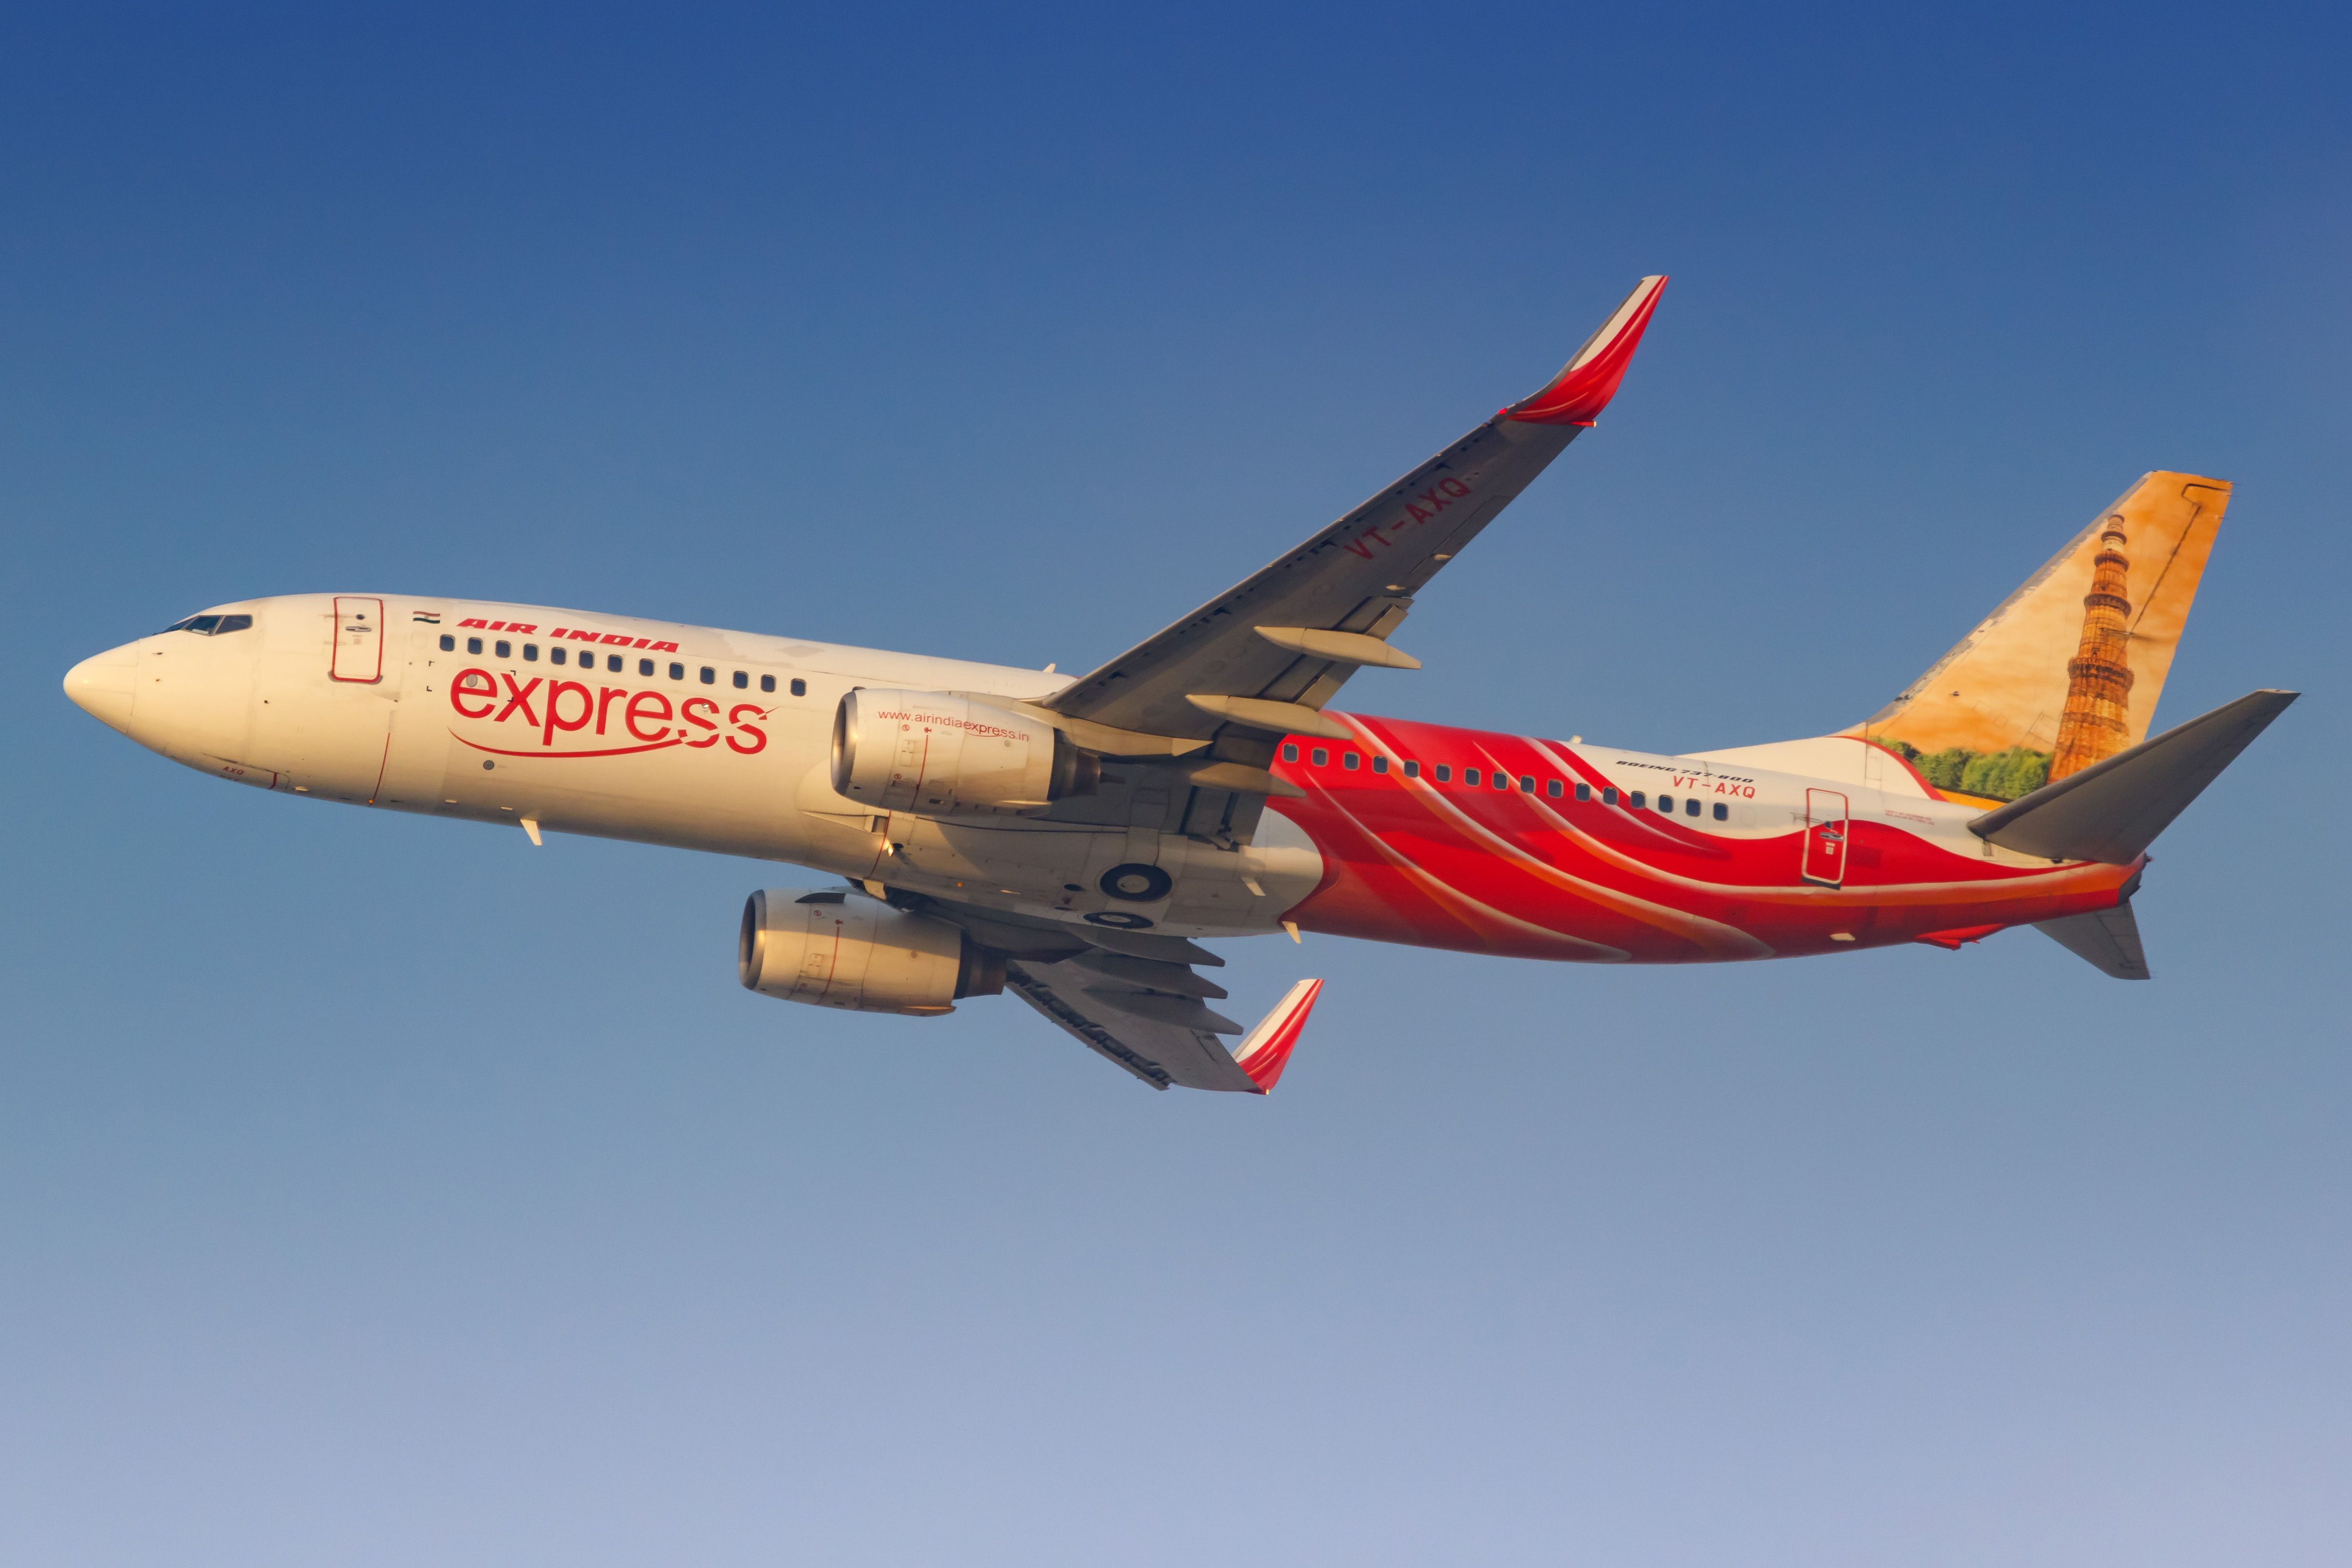 Air India Express Boeing 737-800 flying